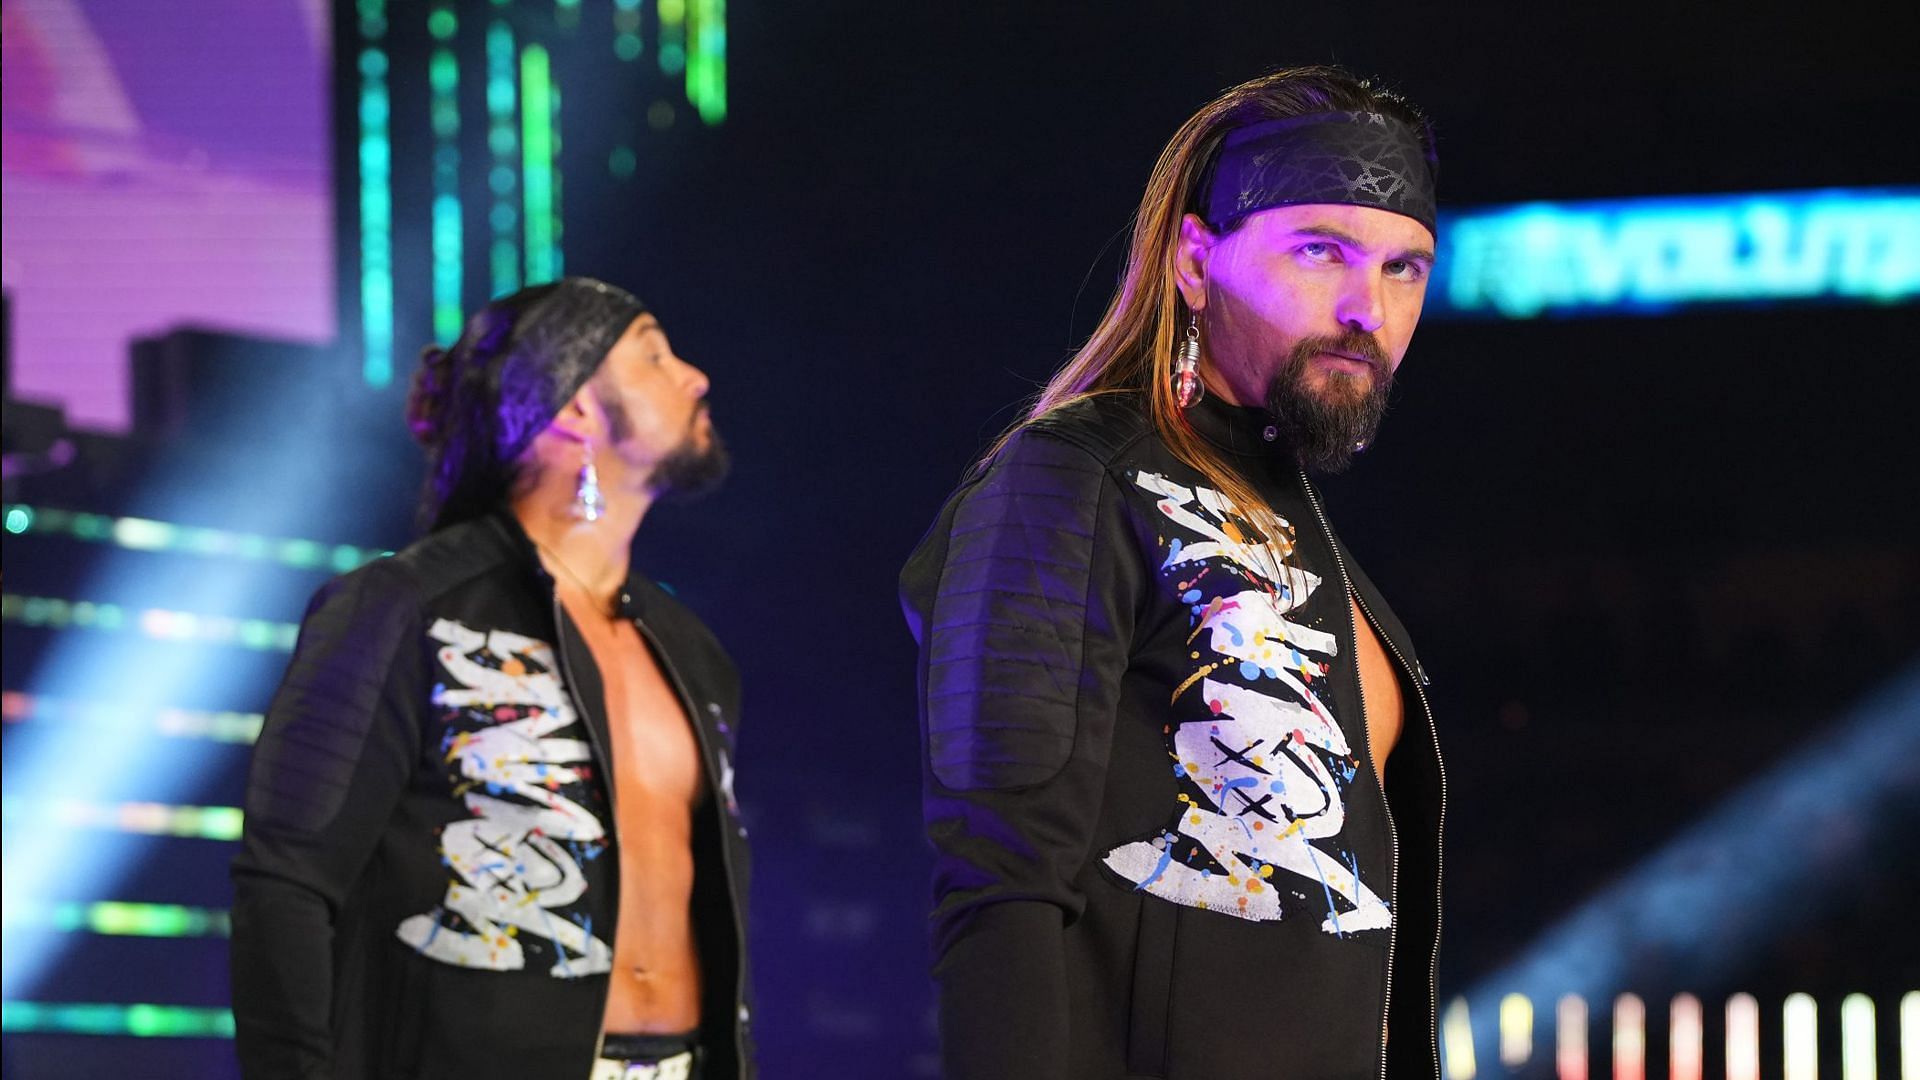 The Young Bucks are seemingly returning to their villainous ways